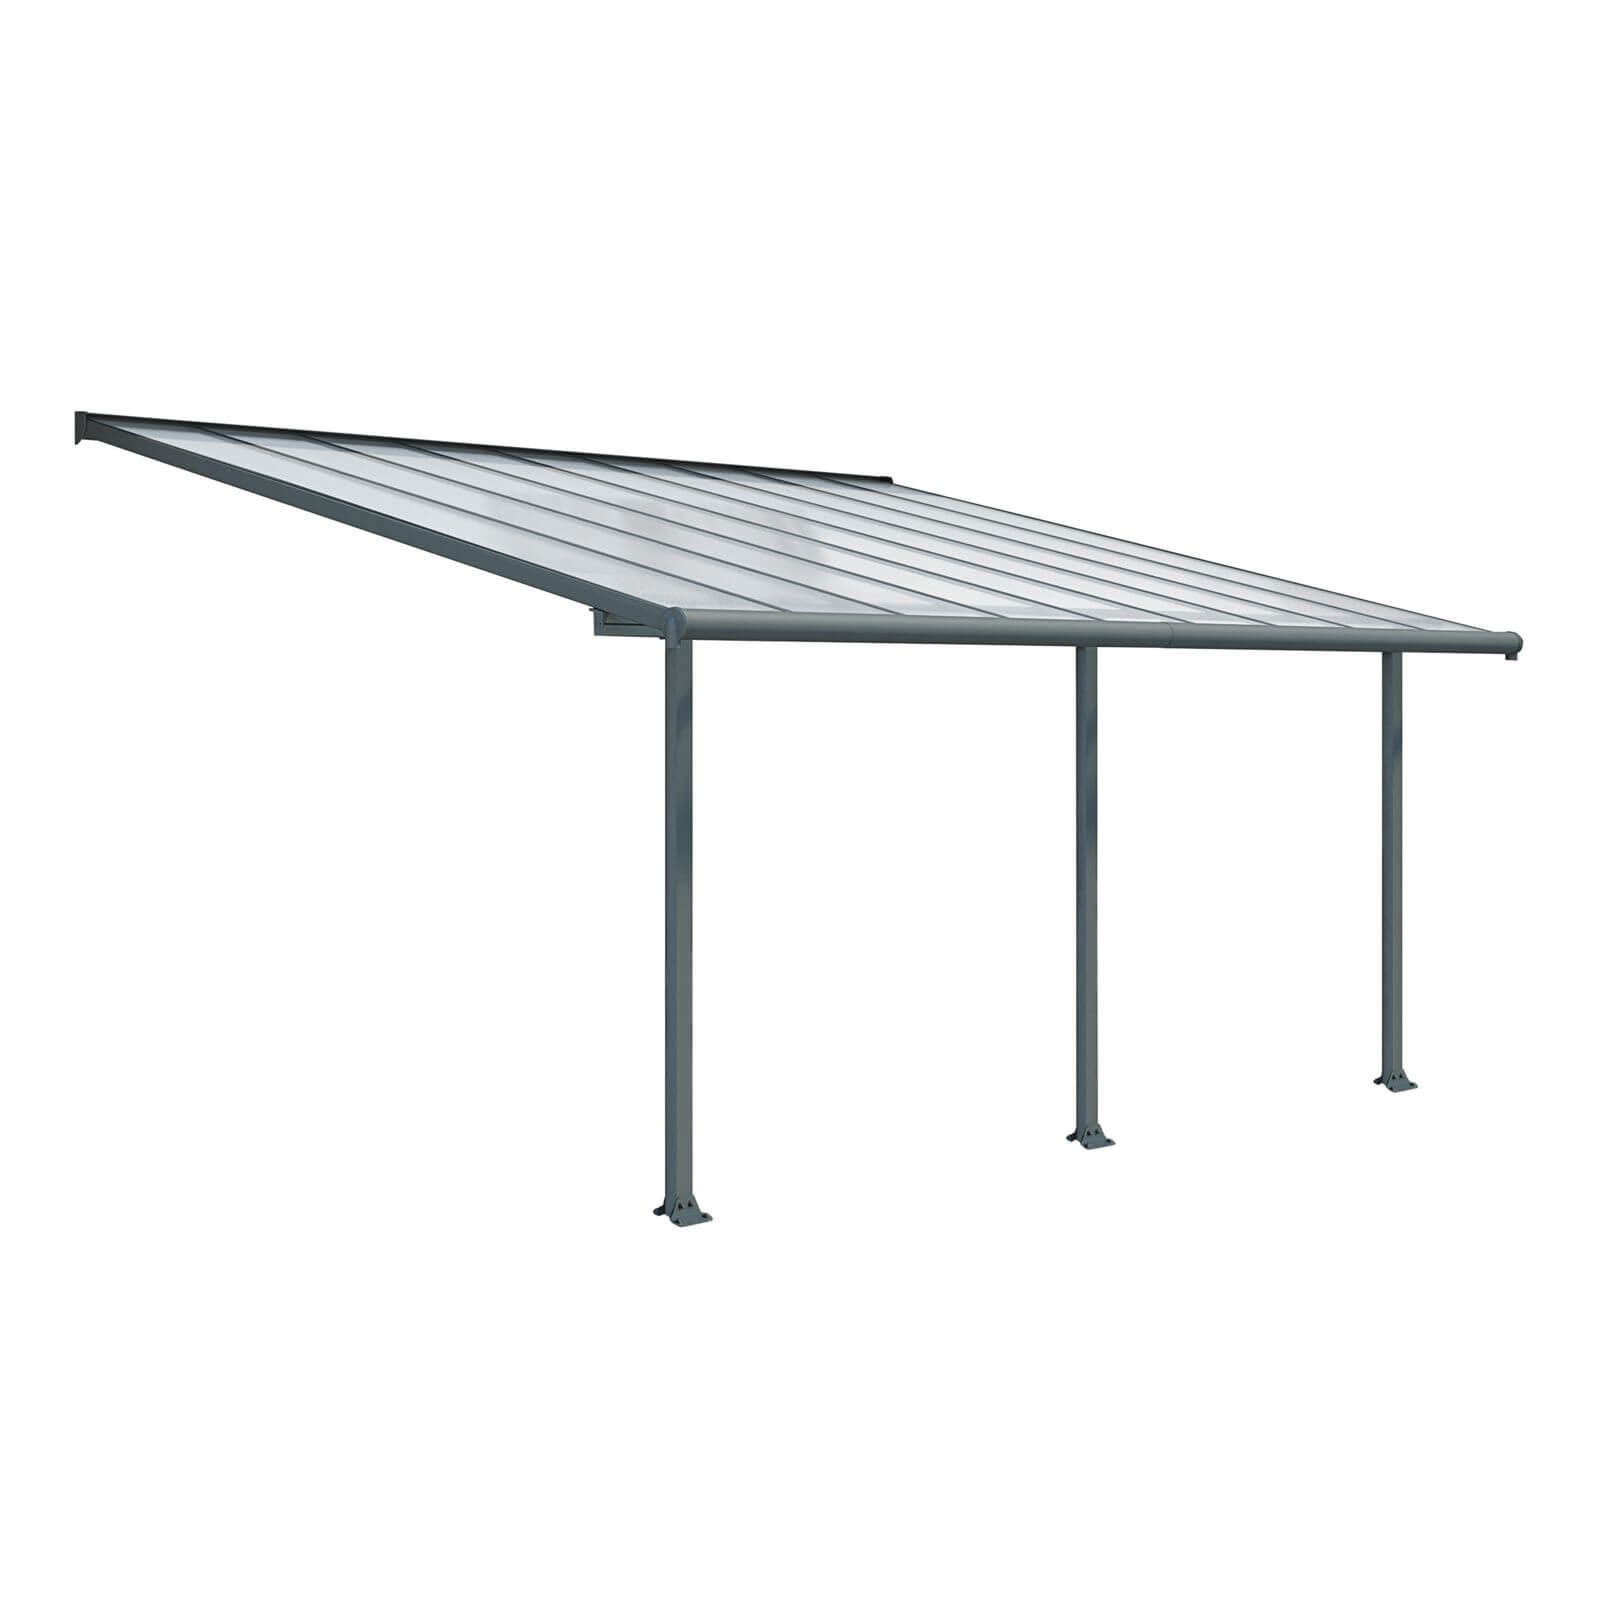 Photo of Palram - Canopia Olympia Patio Cover 3x7.30 Grey Clear